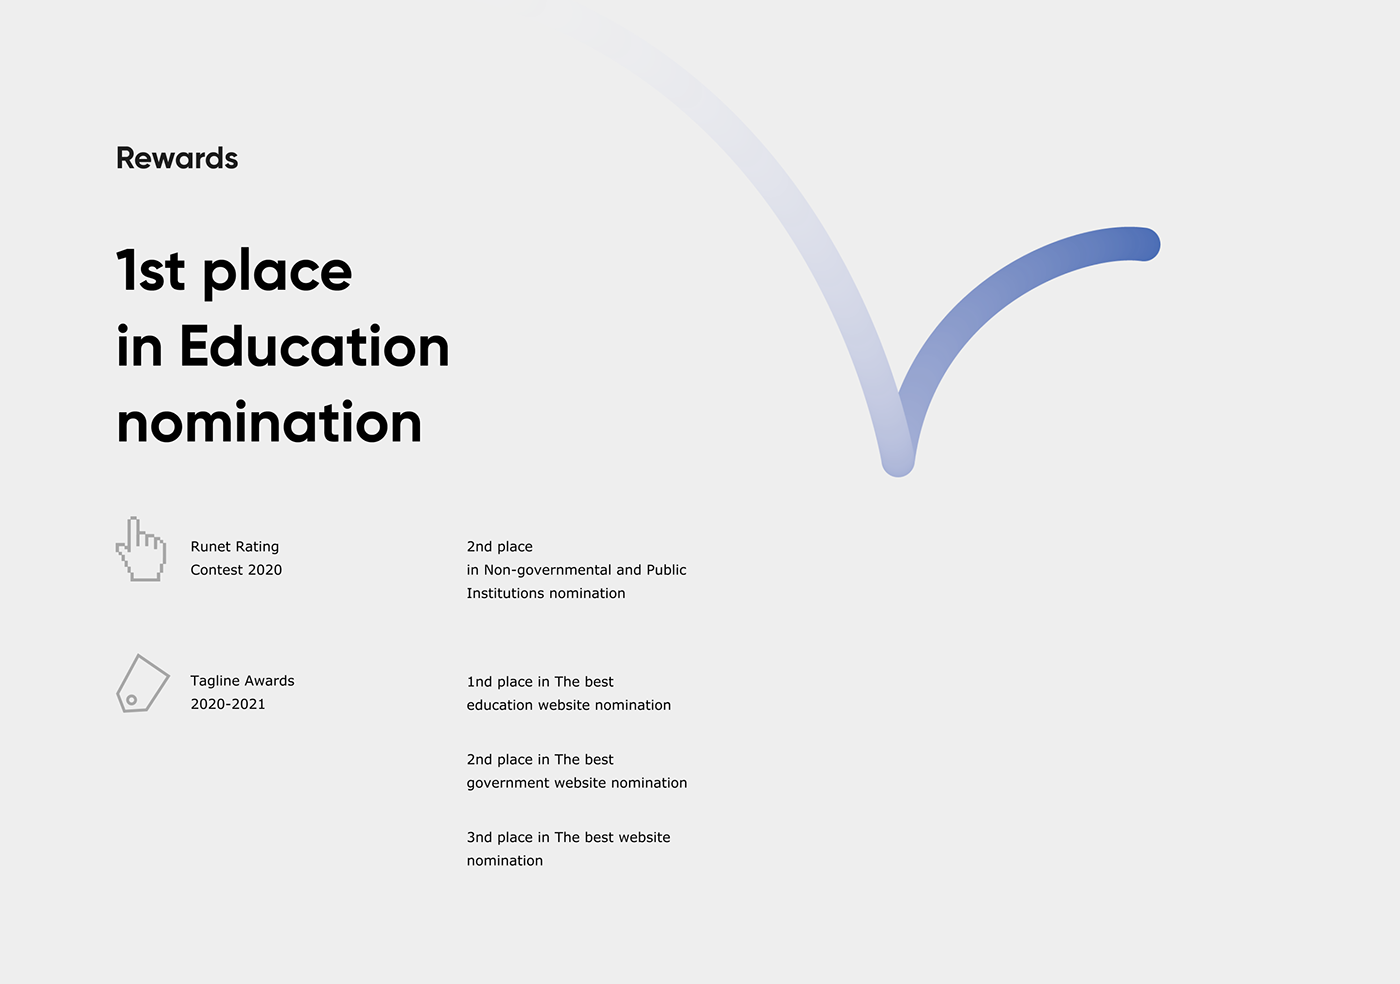 Education interraction science student UI University ux digital Interface Moscow